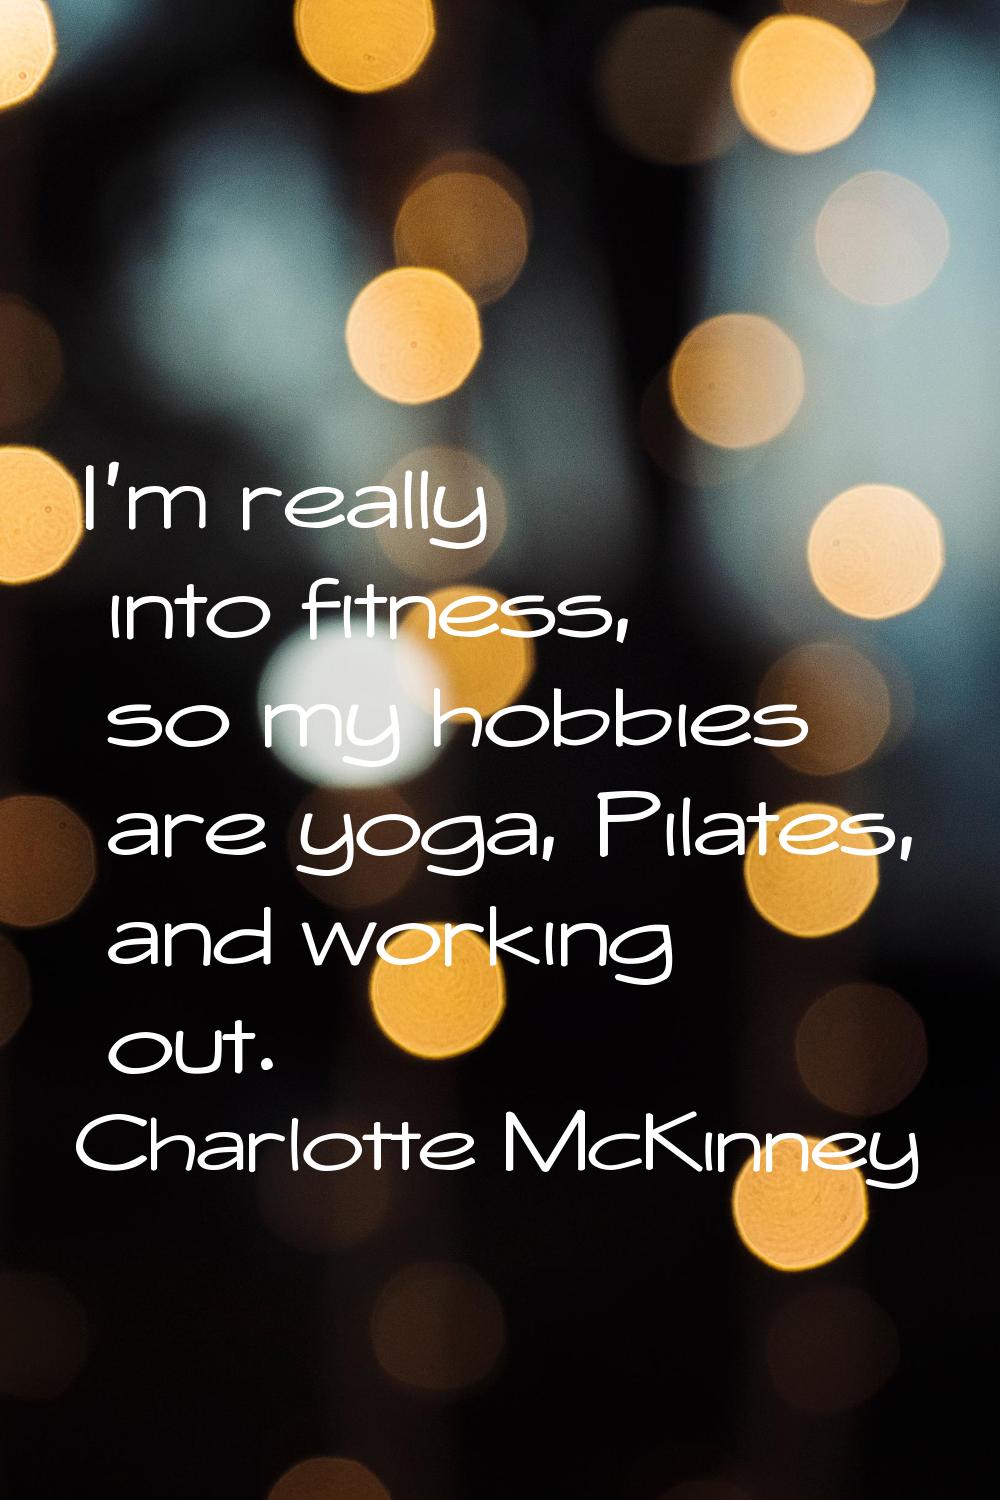 I'm really into fitness, so my hobbies are yoga, Pilates, and working out.